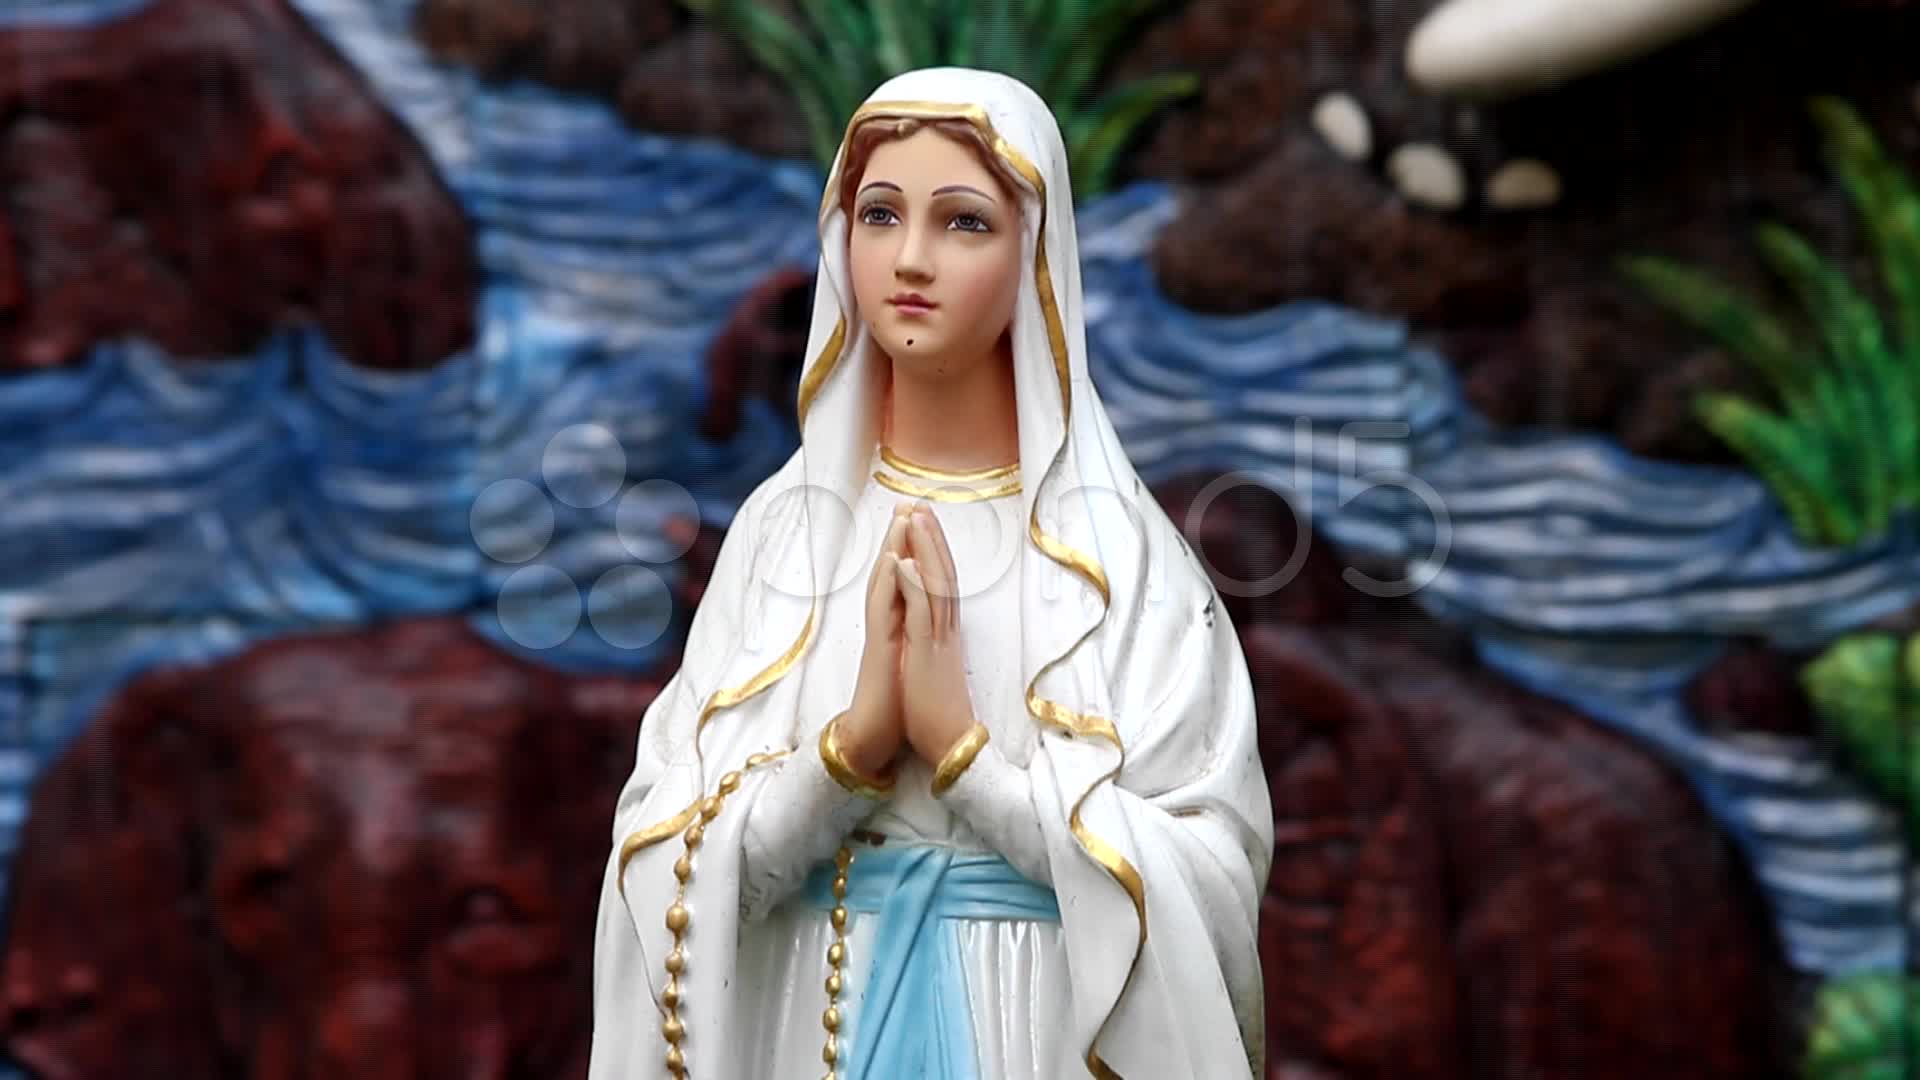 Mother Mary Full Hd Images - carrotapp